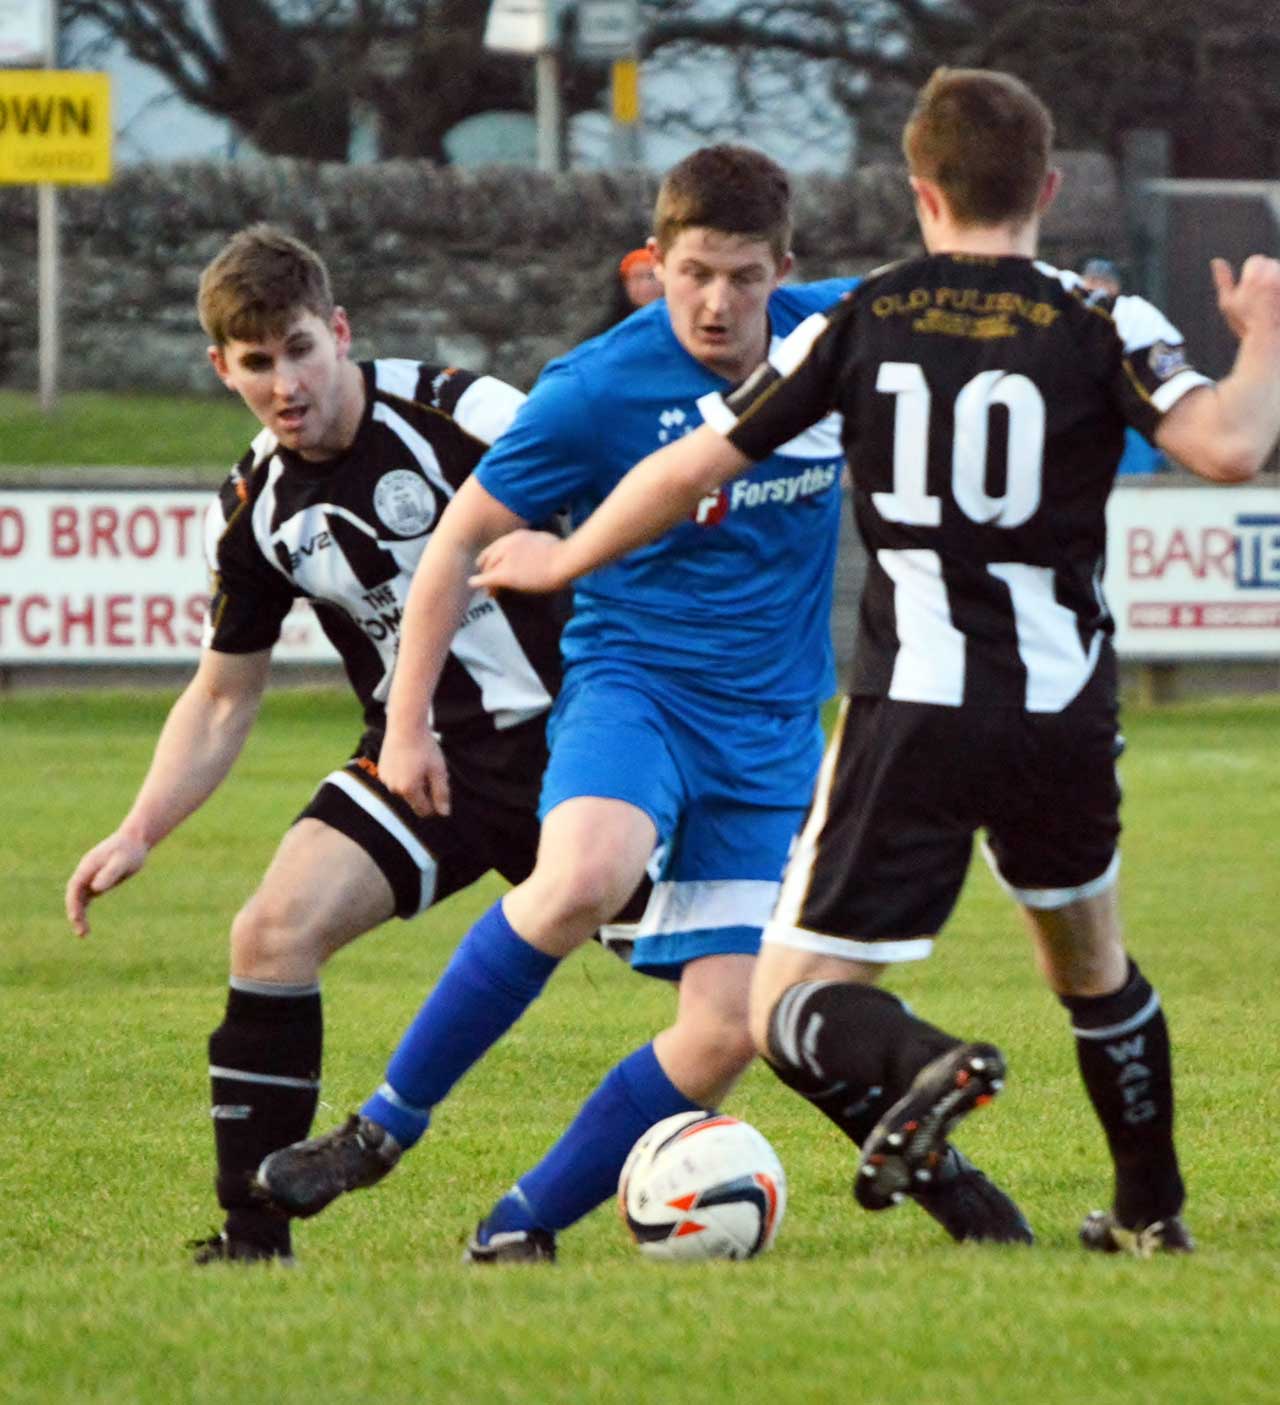 Photo: Wick Academy 6 Rothes 1 - 23 January 2016